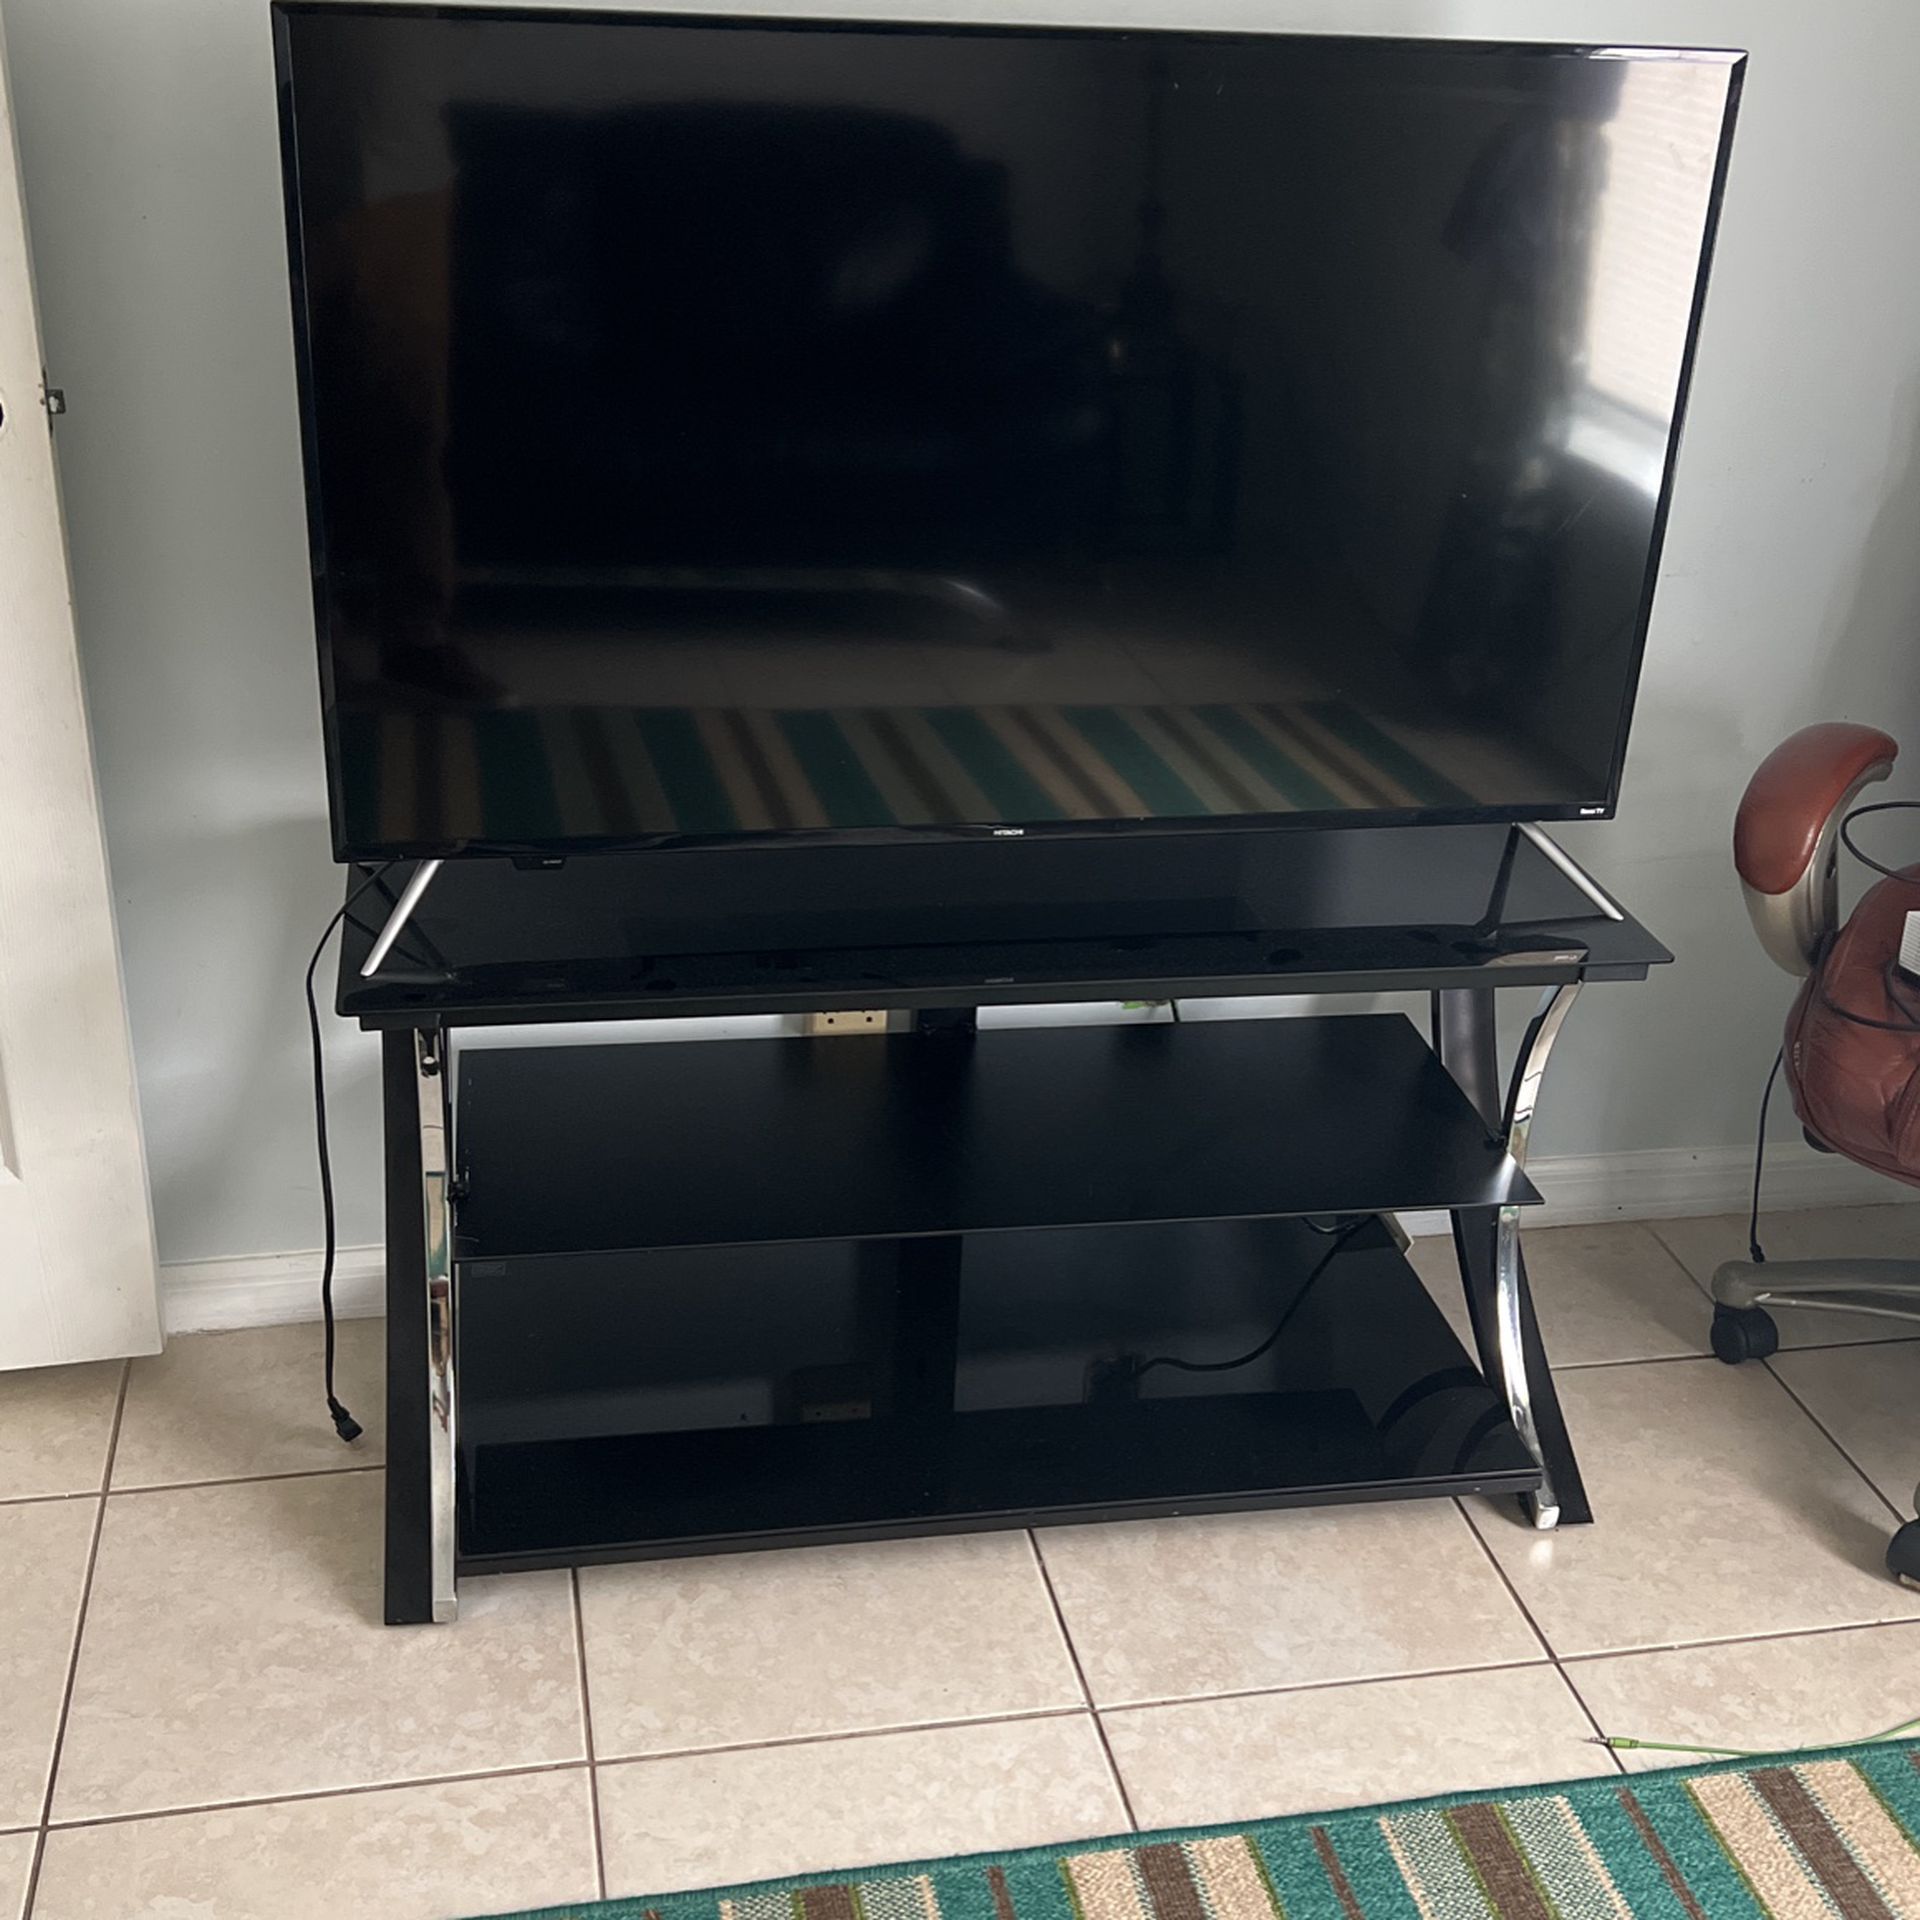 46 Inch Hitachi Roku Smart Tv With The stand 